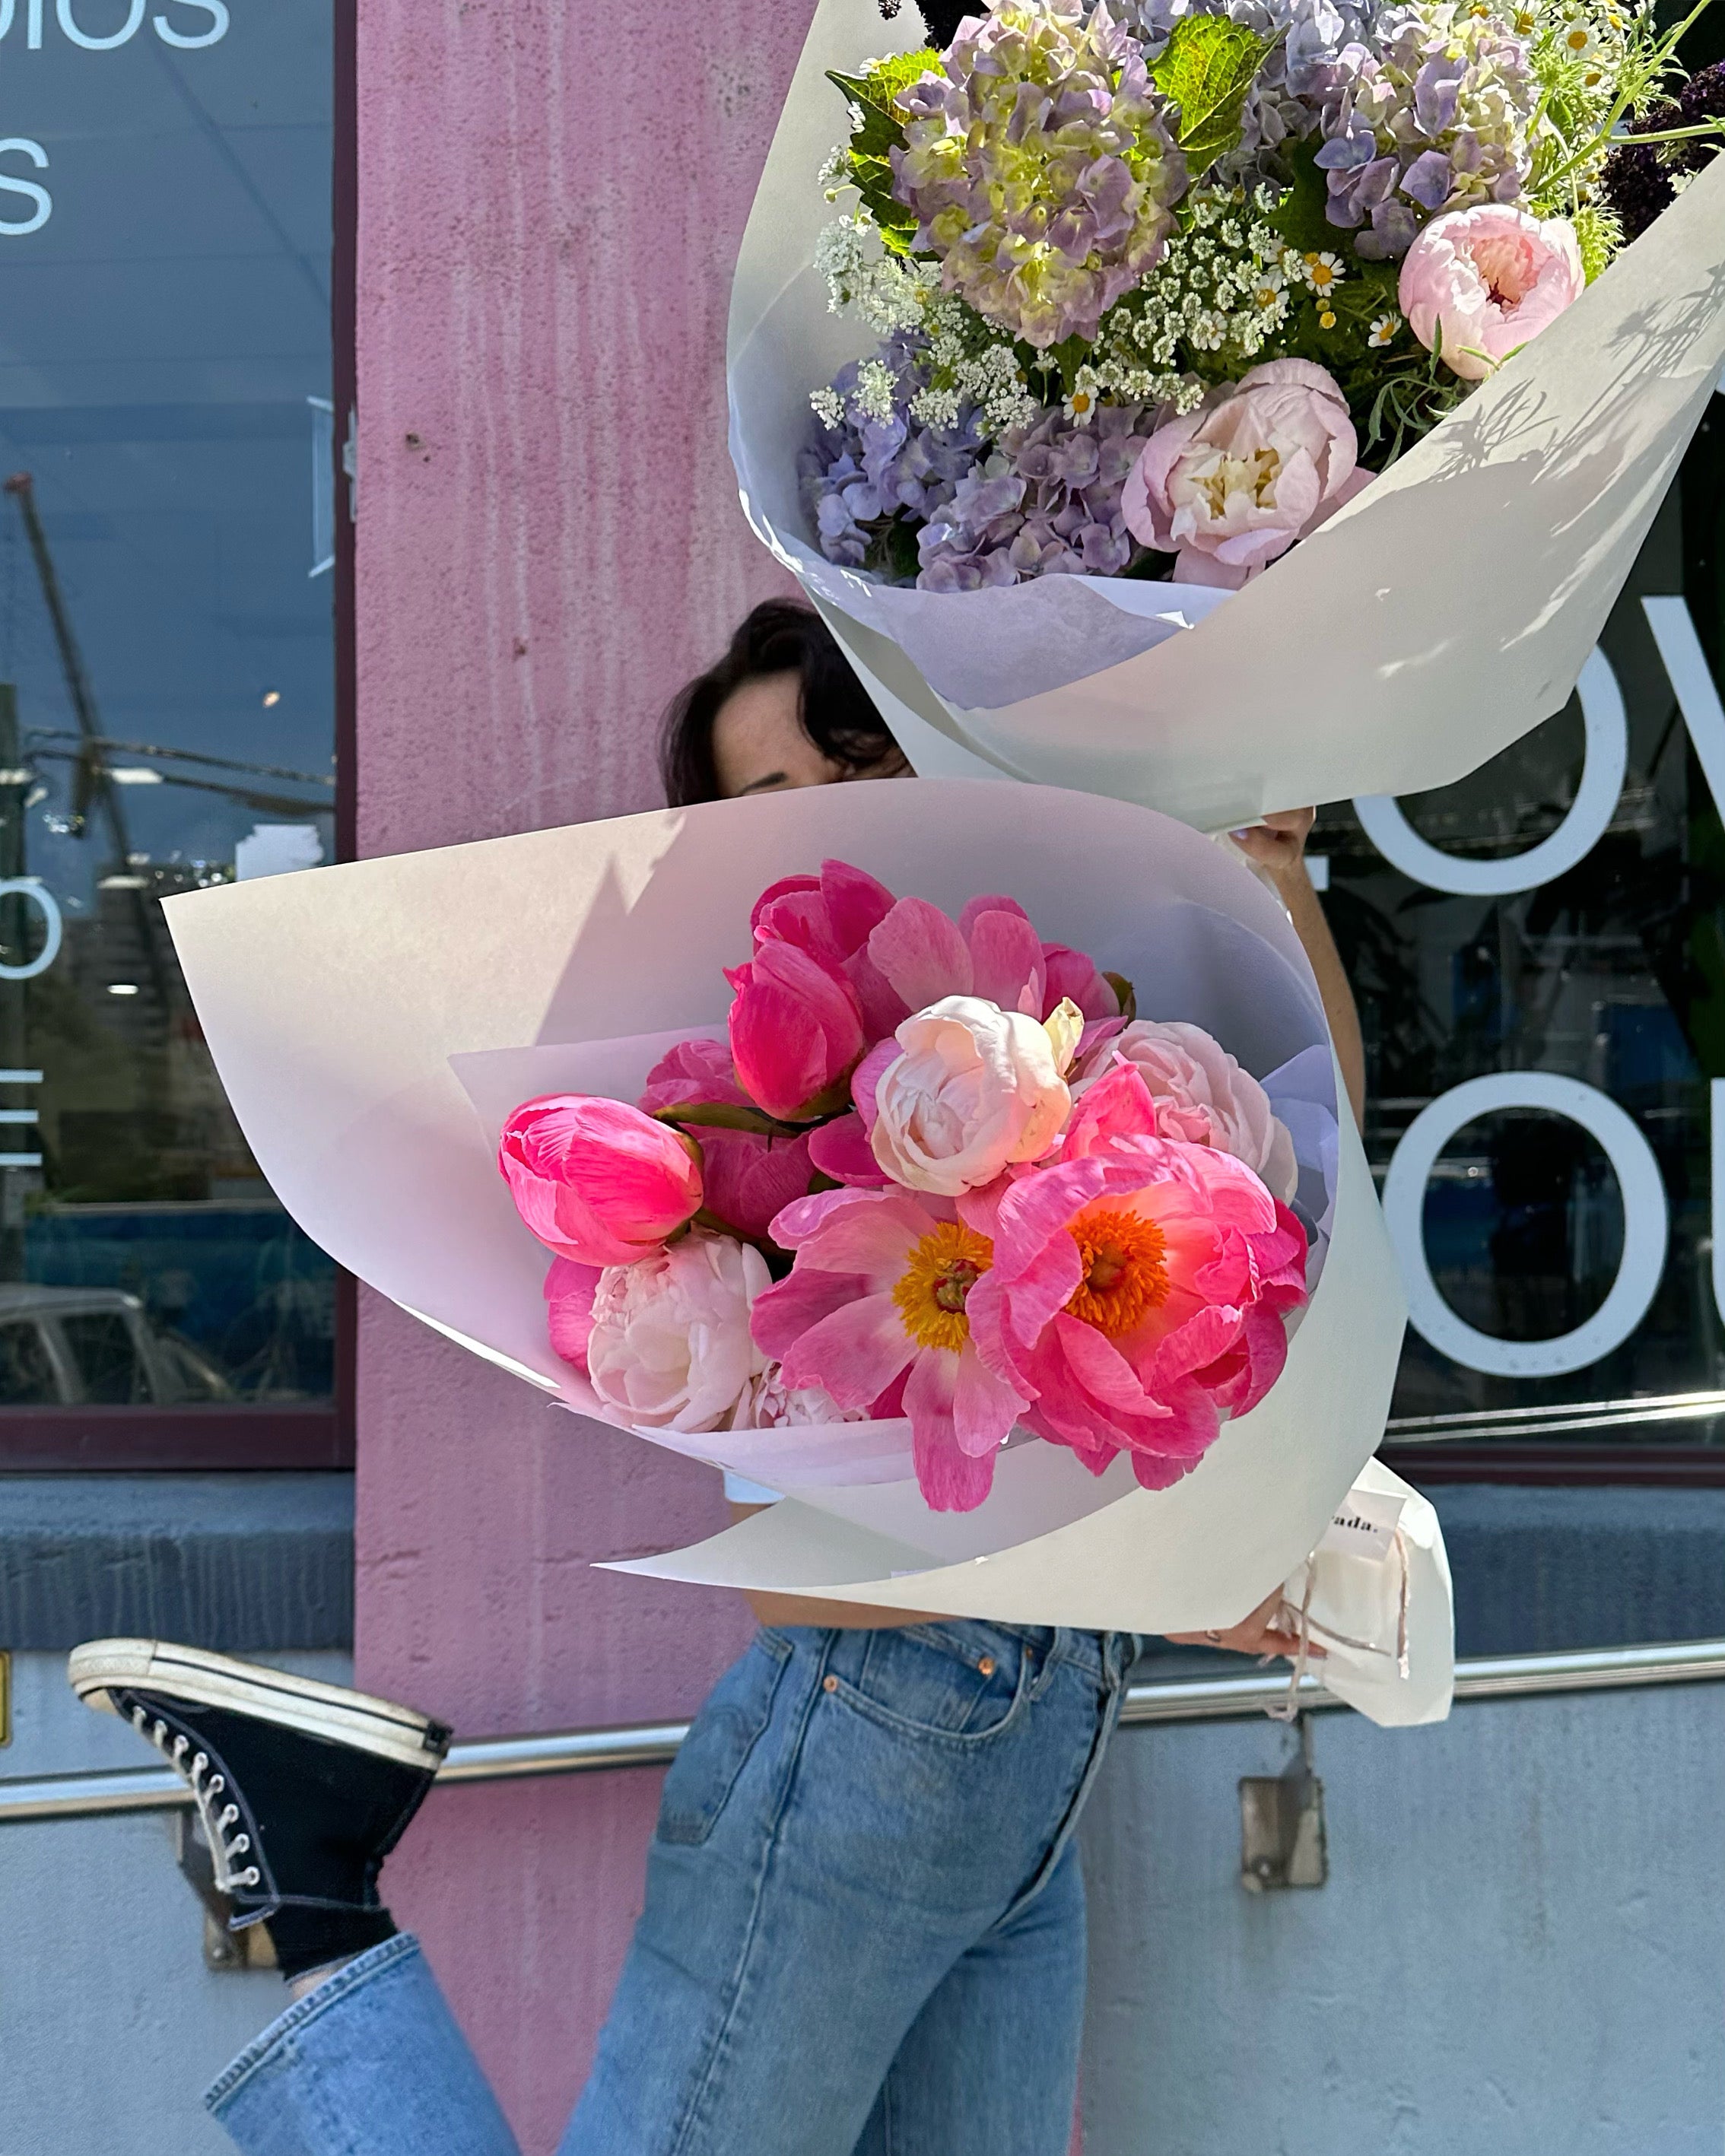 A Call to Ban Plastic Sleeves for Cut Flowers in NSW